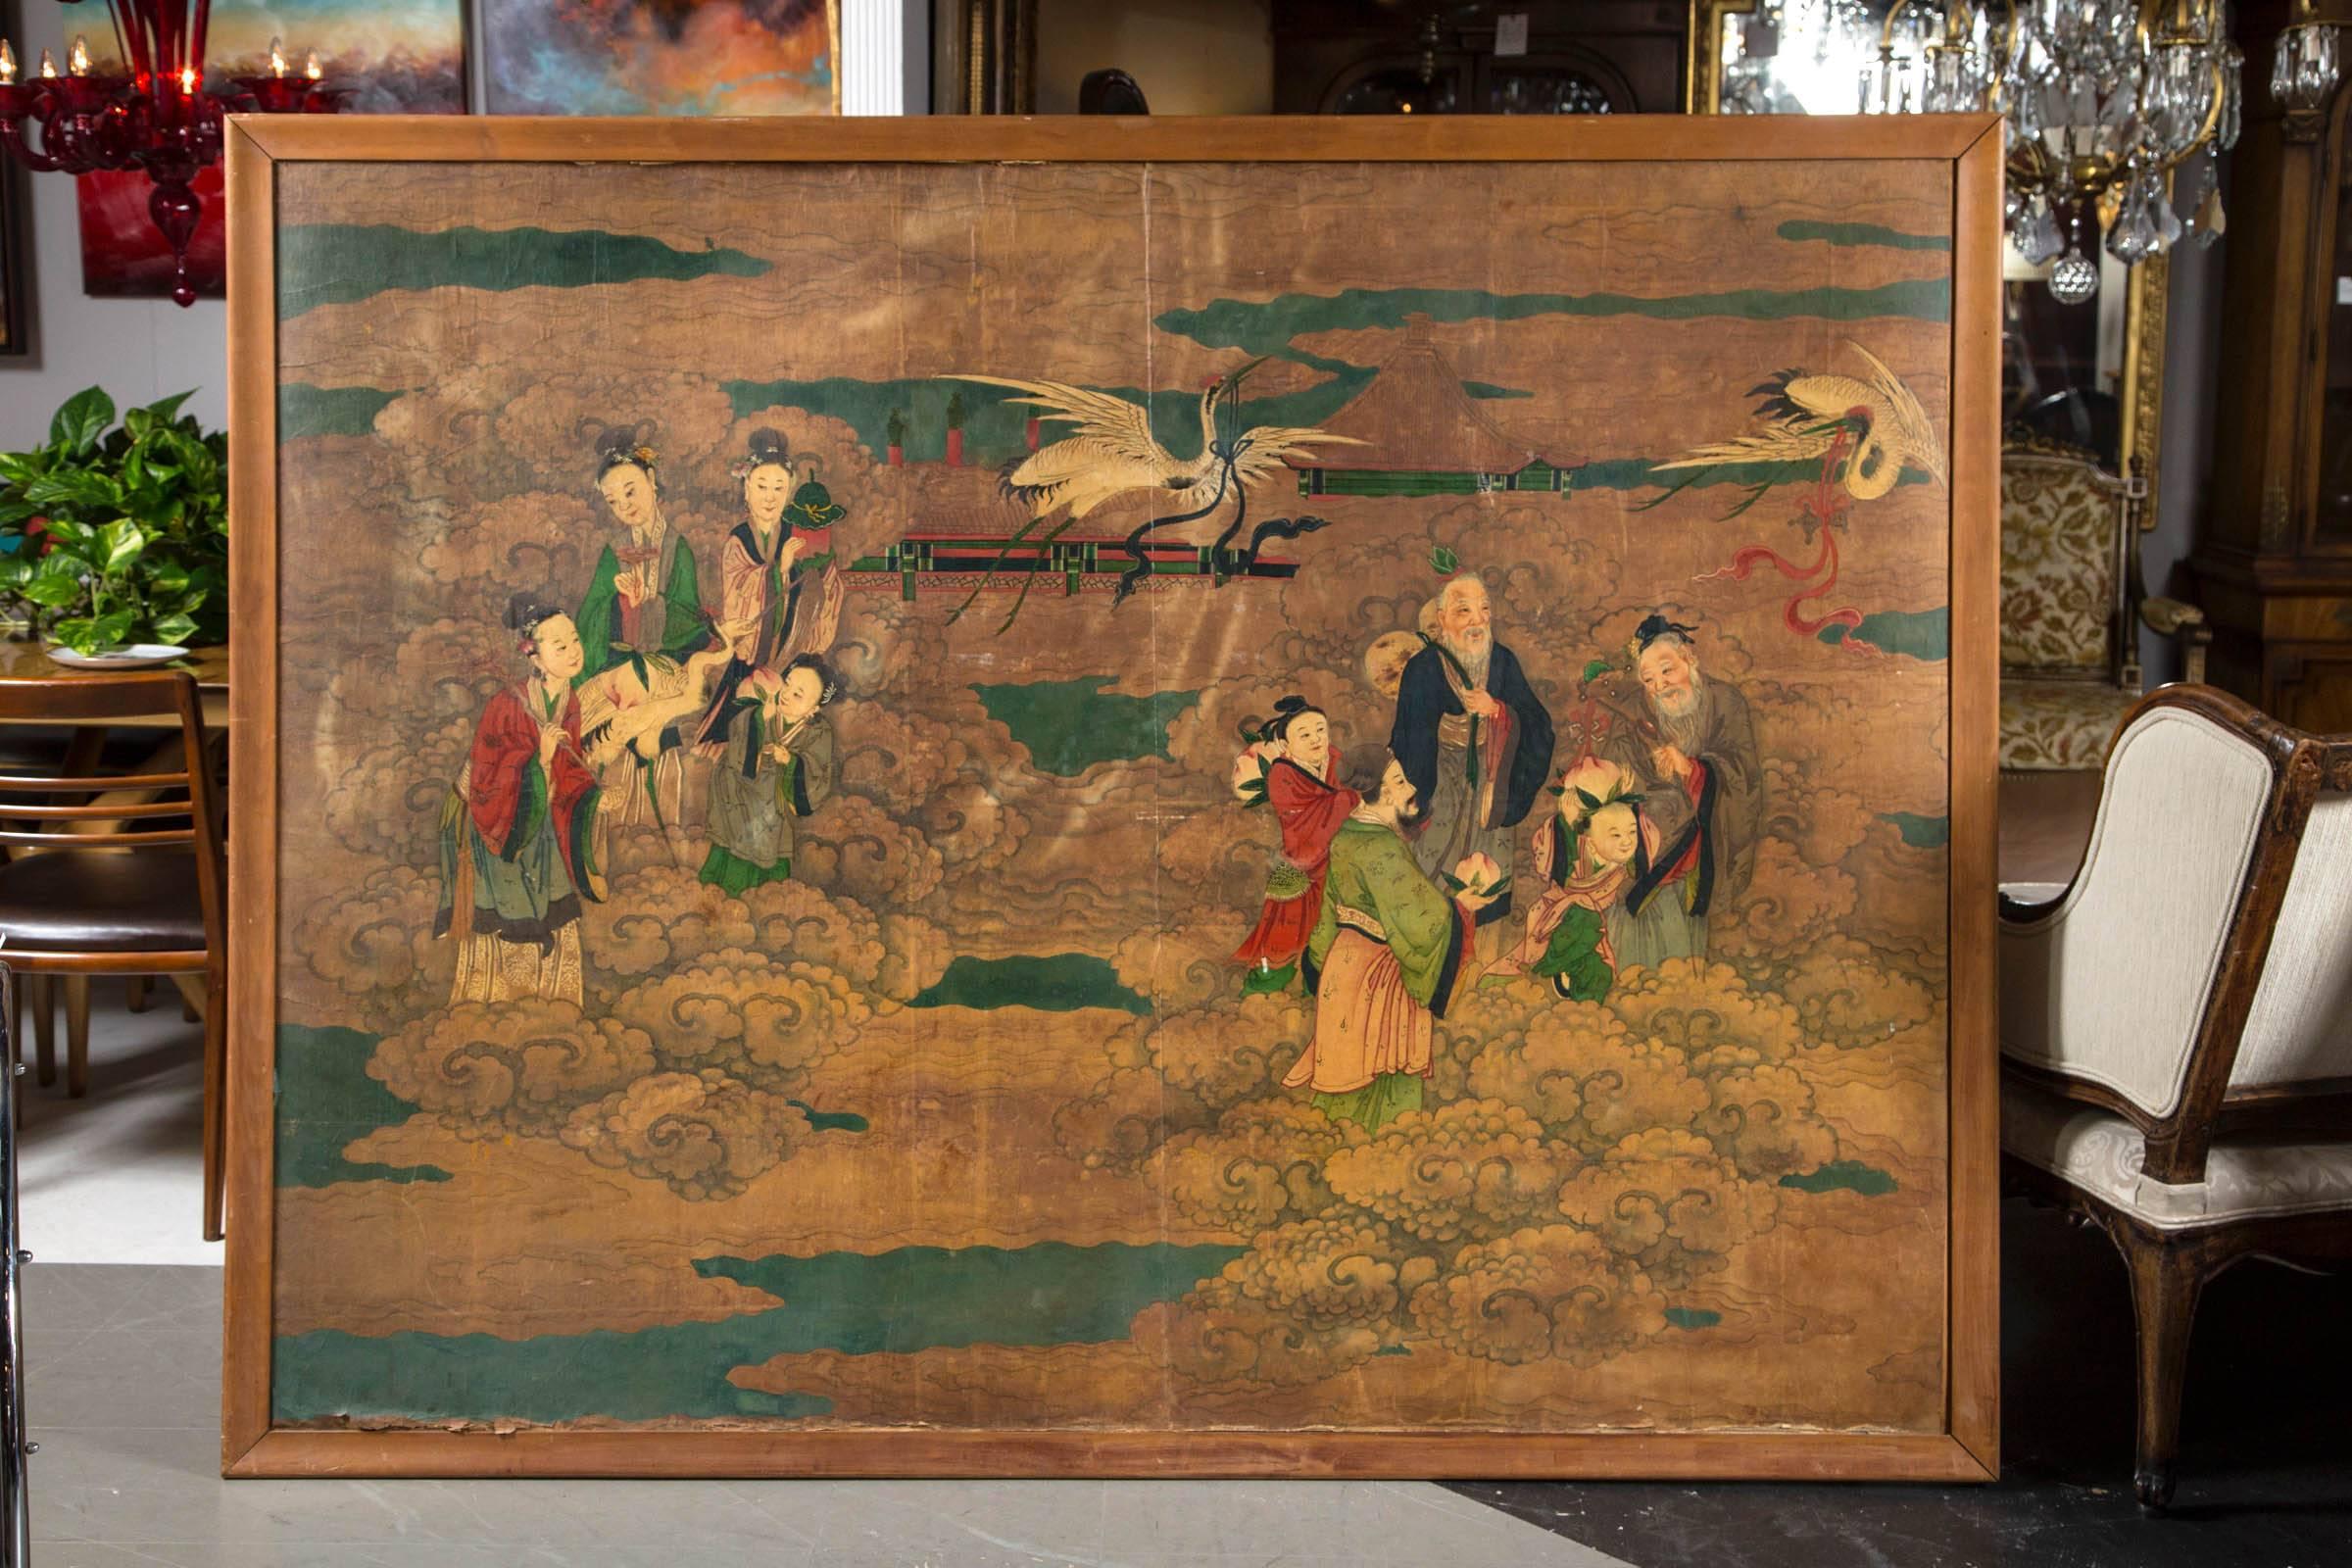 A large 19th century or earlier painted scene of pastures with figures. Having lifelike colors and detailed depictions of Asian folks with real expressions on their faces. Measure: Large size 77